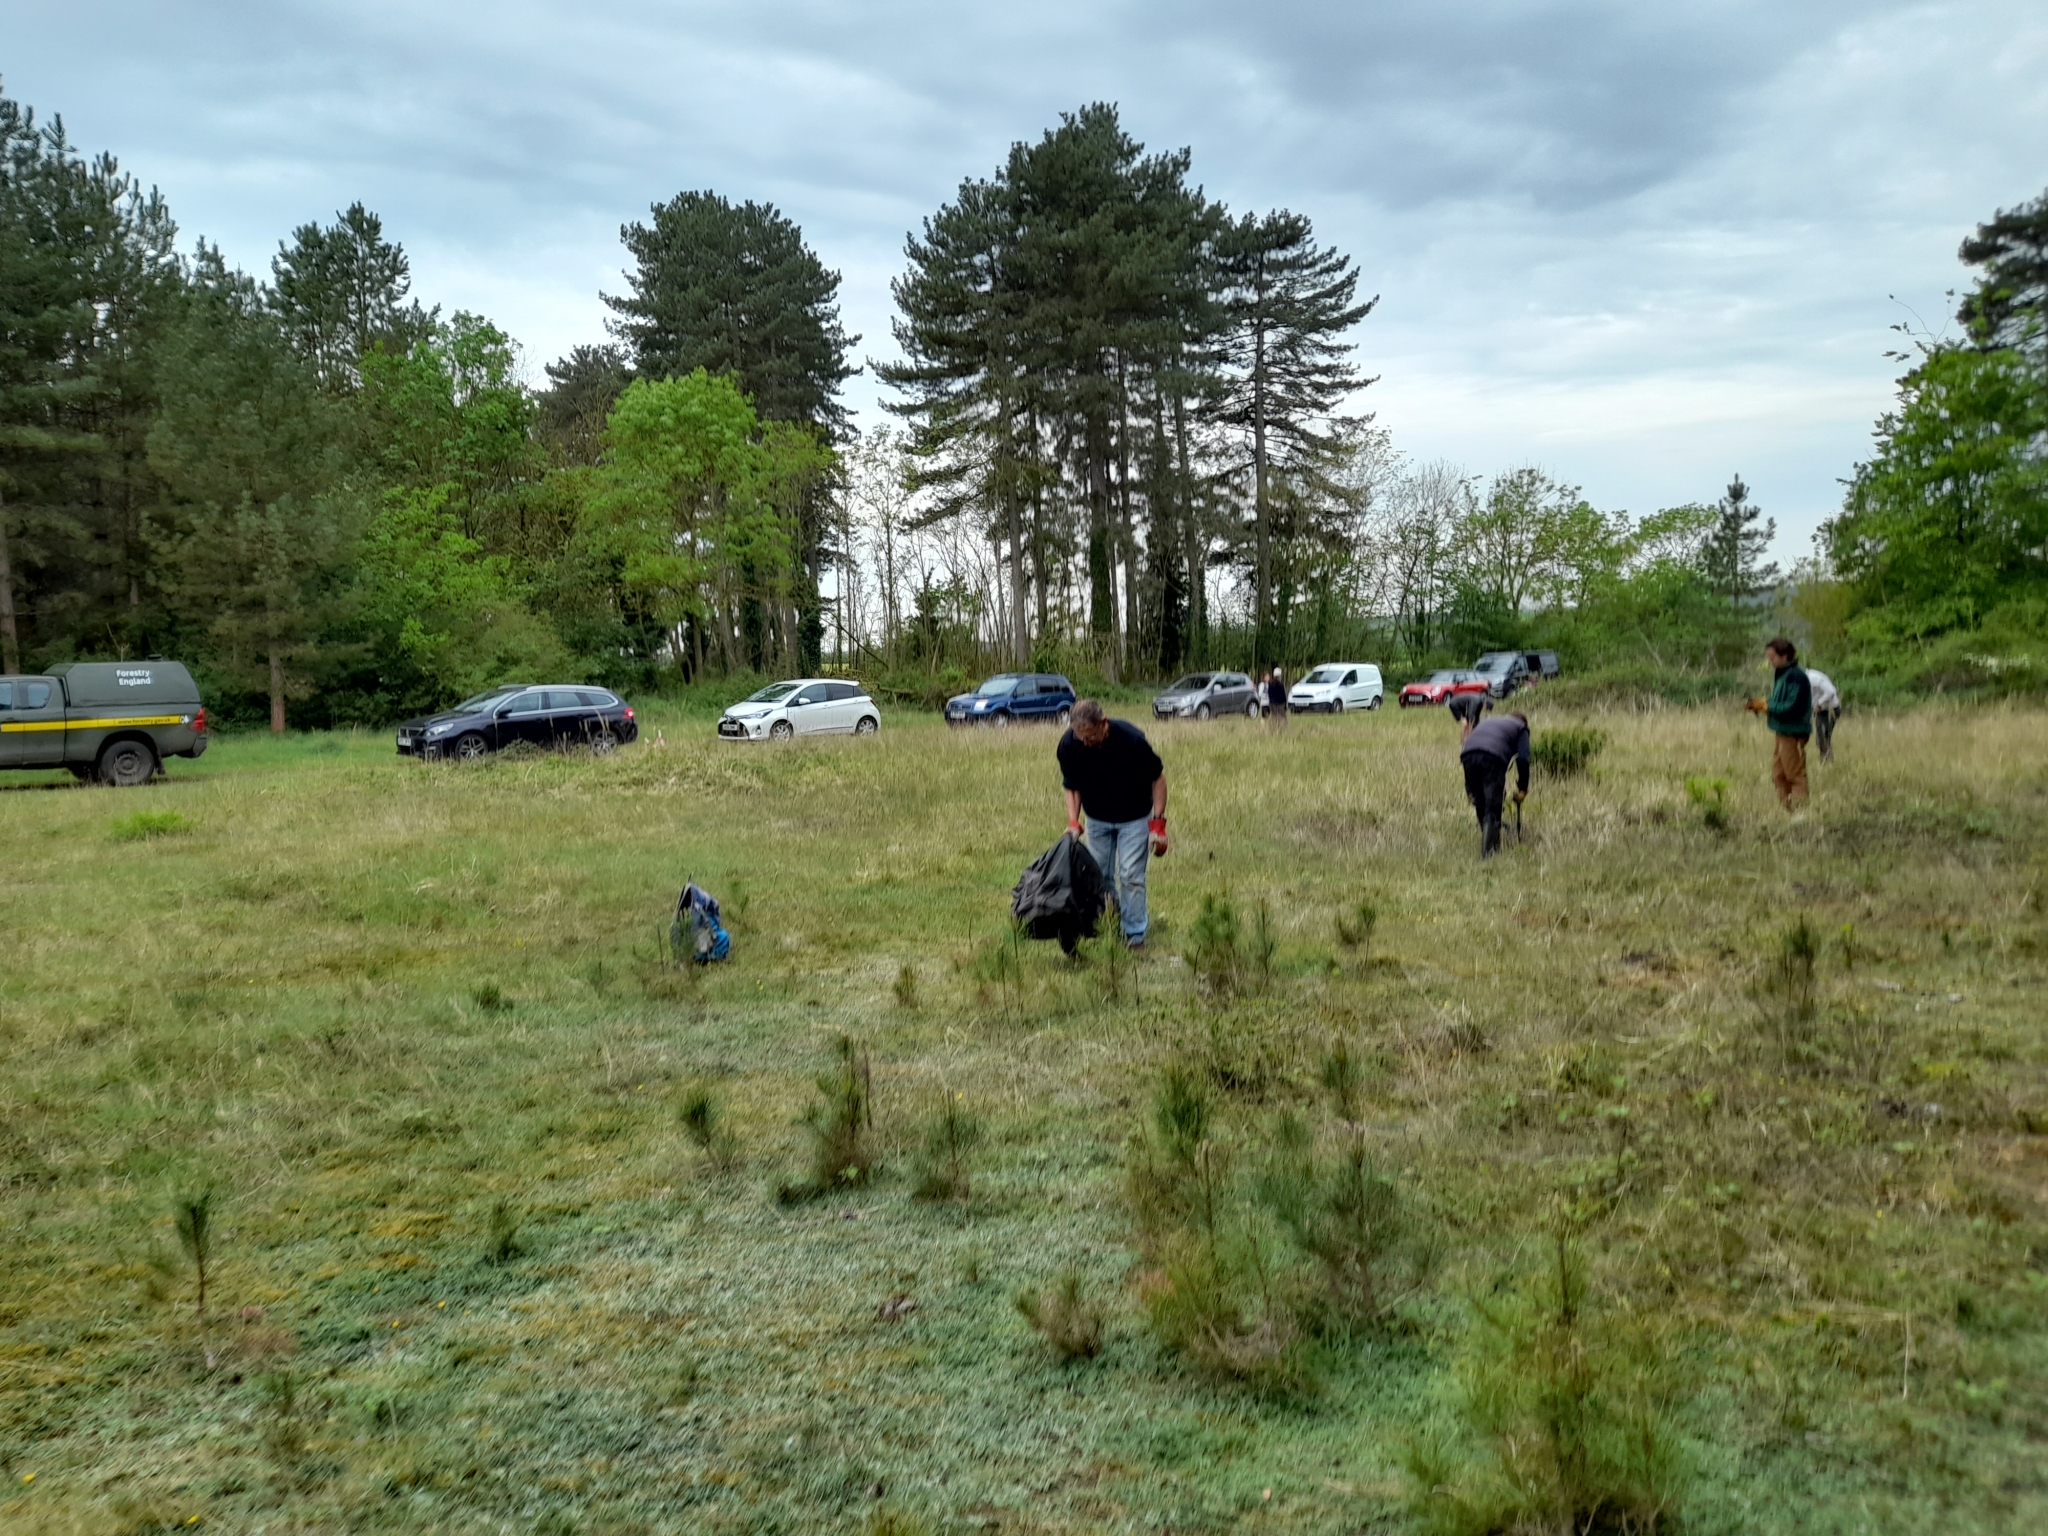 A photo from the FoTF Conservation Event - May 2022 - Self Sown Fir Removal at Kings Forest : Volunteers work to remove self sown Firs